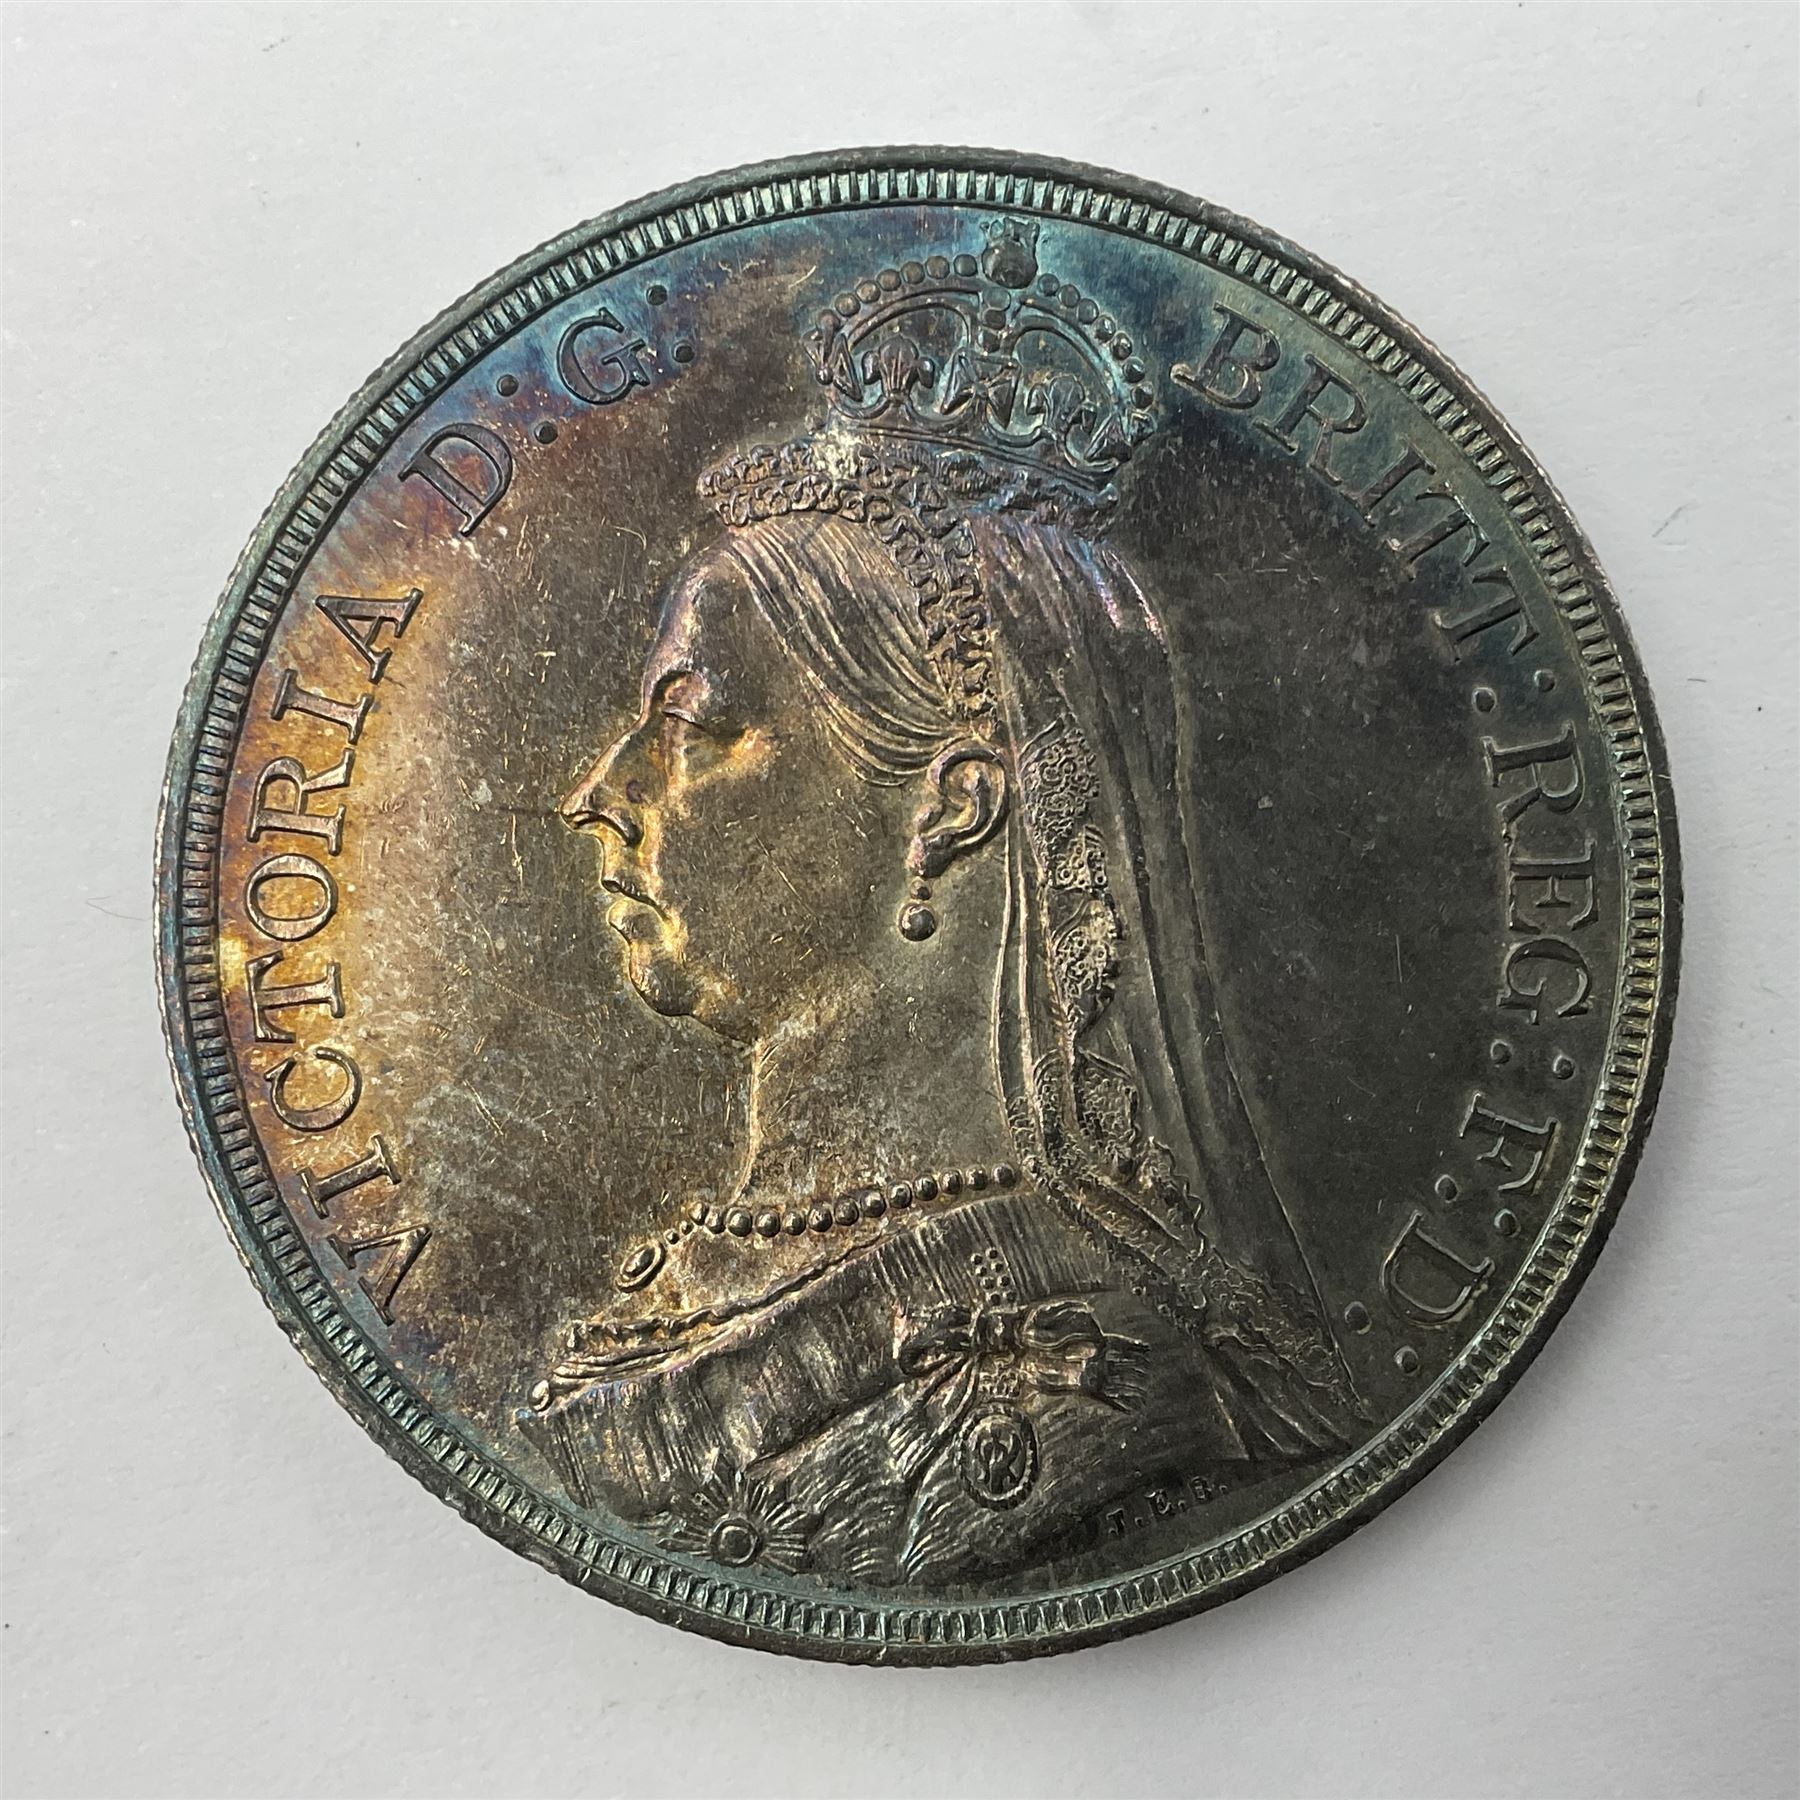 Queen Victoria 1887 silver crown coin - Image 4 of 4